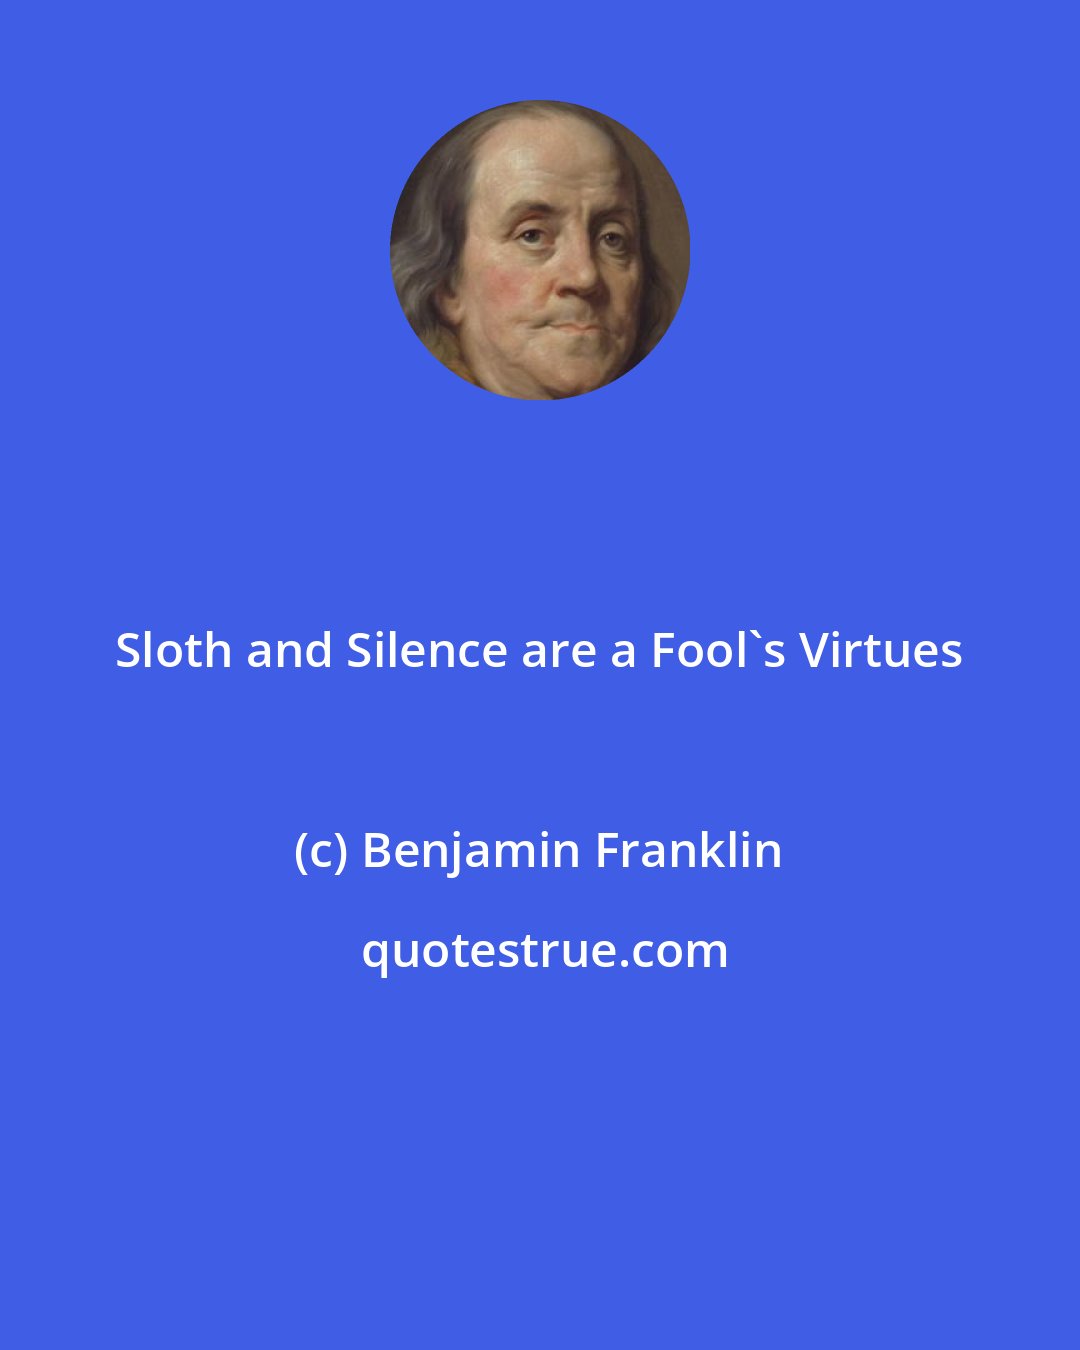 Benjamin Franklin: Sloth and Silence are a Fool's Virtues